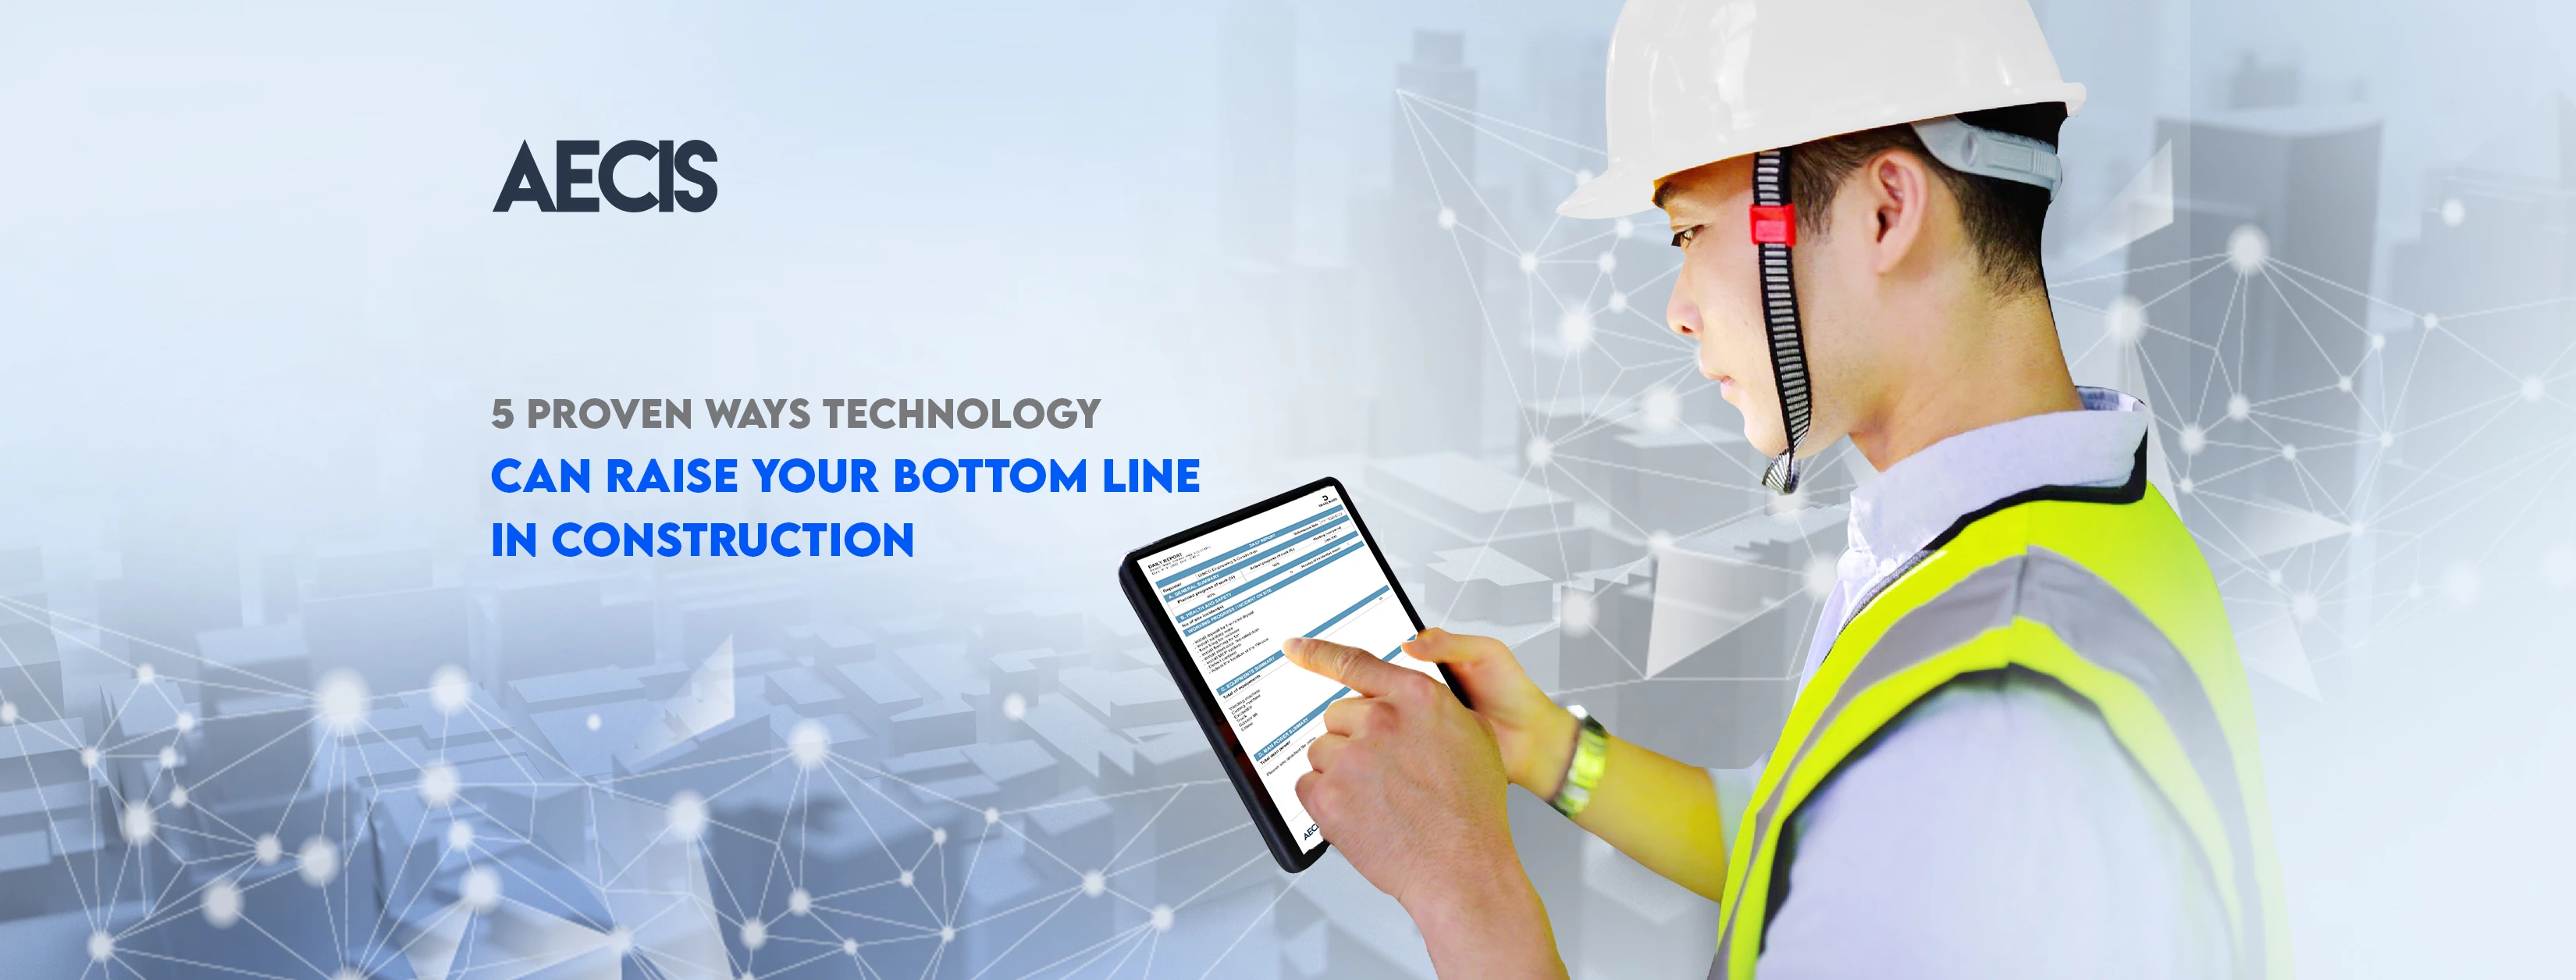 5 proven ways technology can raise the bottom line in construction